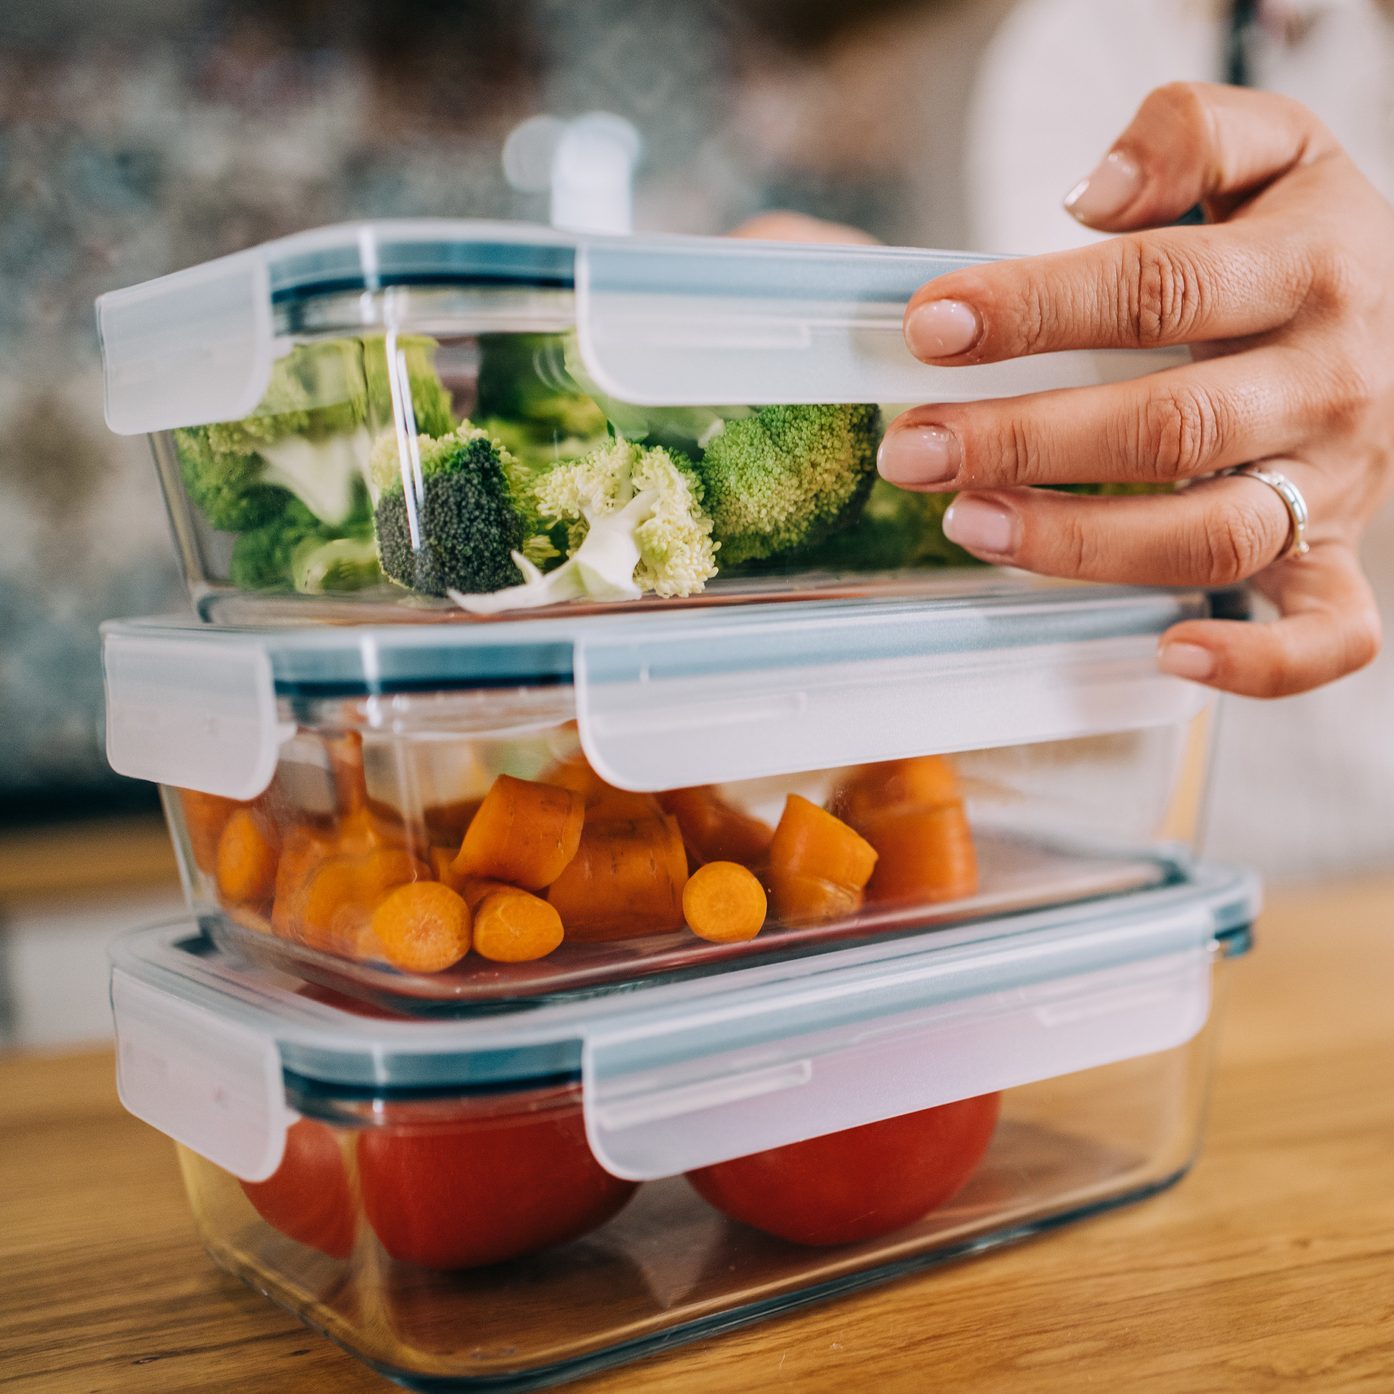 Tips for Choosing and Using Freezer Containers